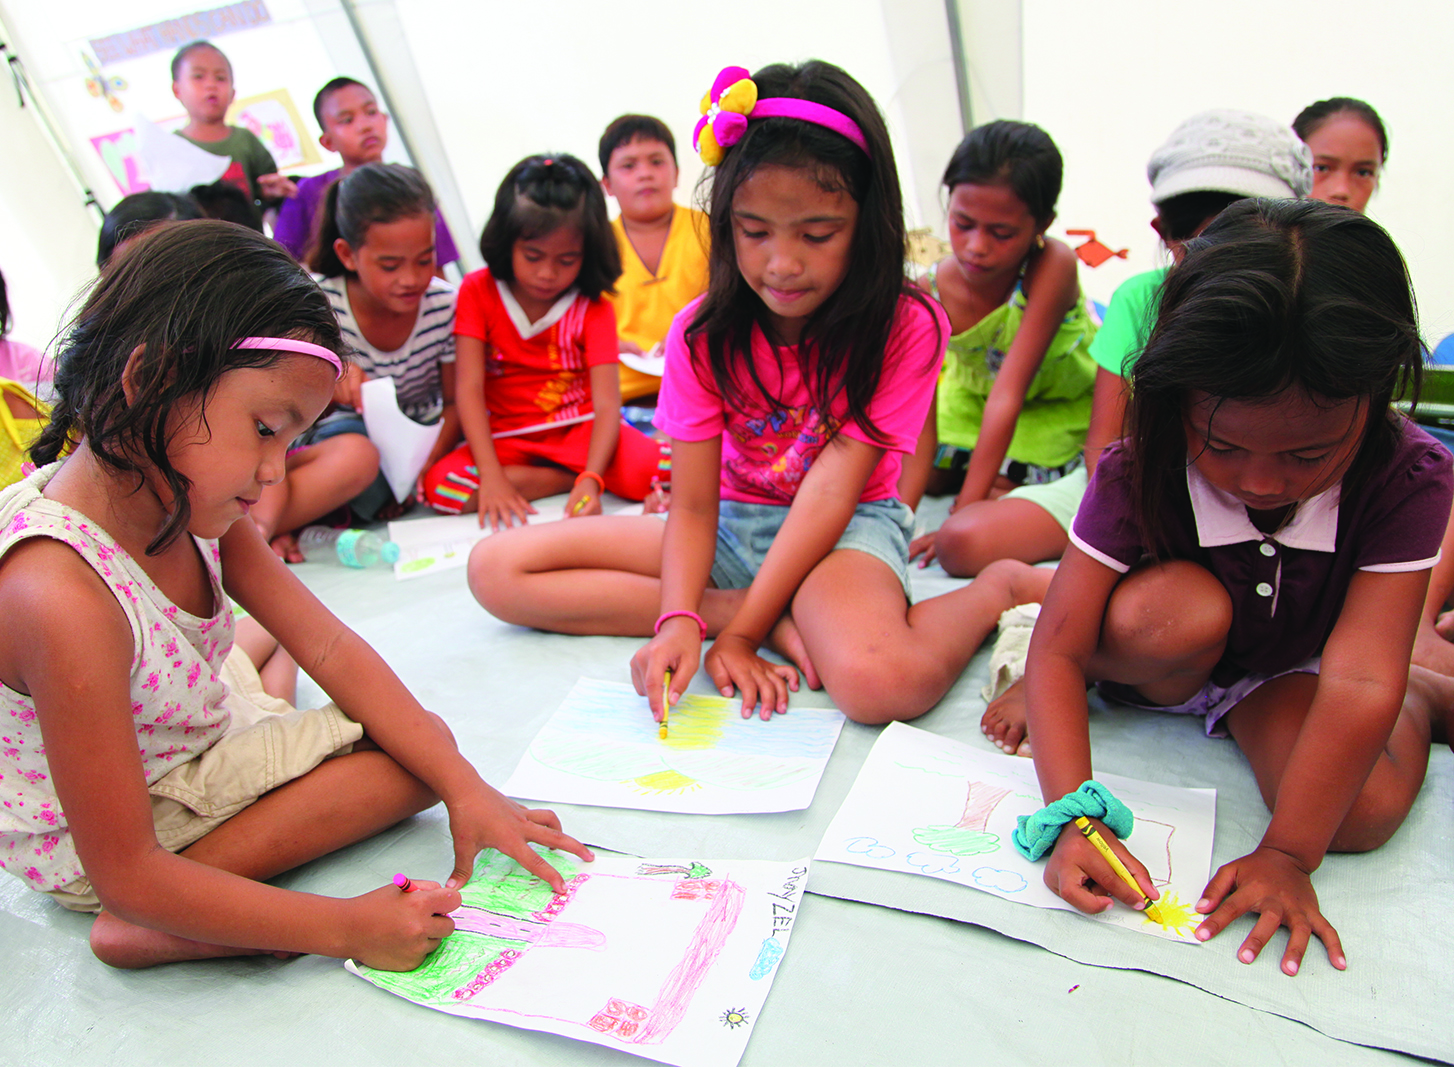 On November 8, 2013, Typhoon Haiyan struck the Philippines. As one part of its response, UNICEF set up a Child-Friendly Space where children can participate in educational and recreational activities as well as receive psychosocial support. 